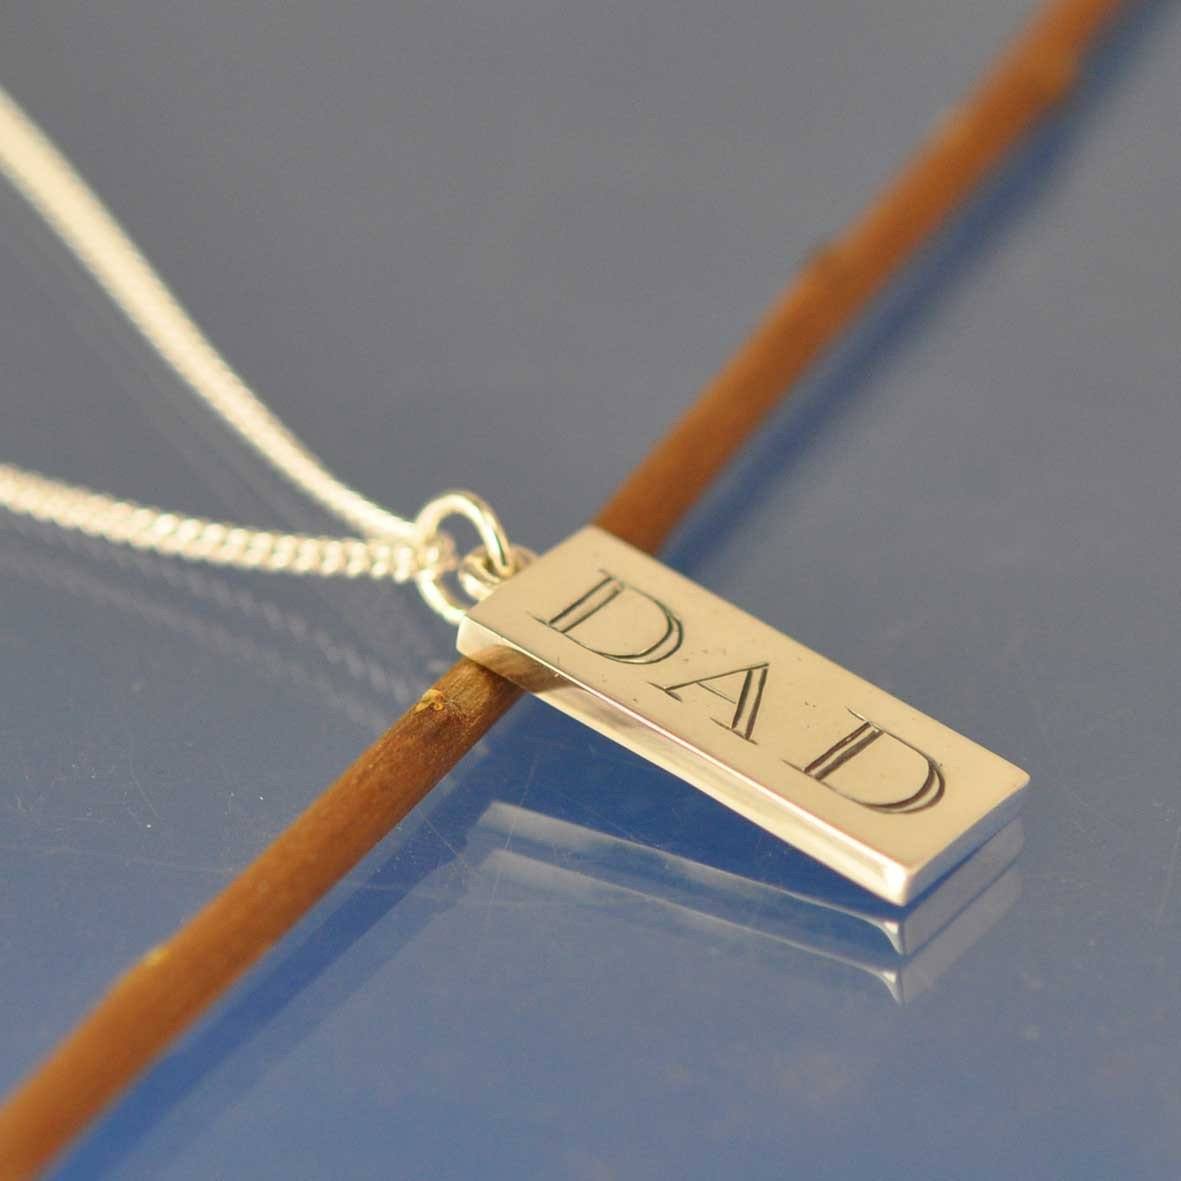 Cremated Ashes Necklace - Rectangular Drop Pendant by Chris Parry Jewellery